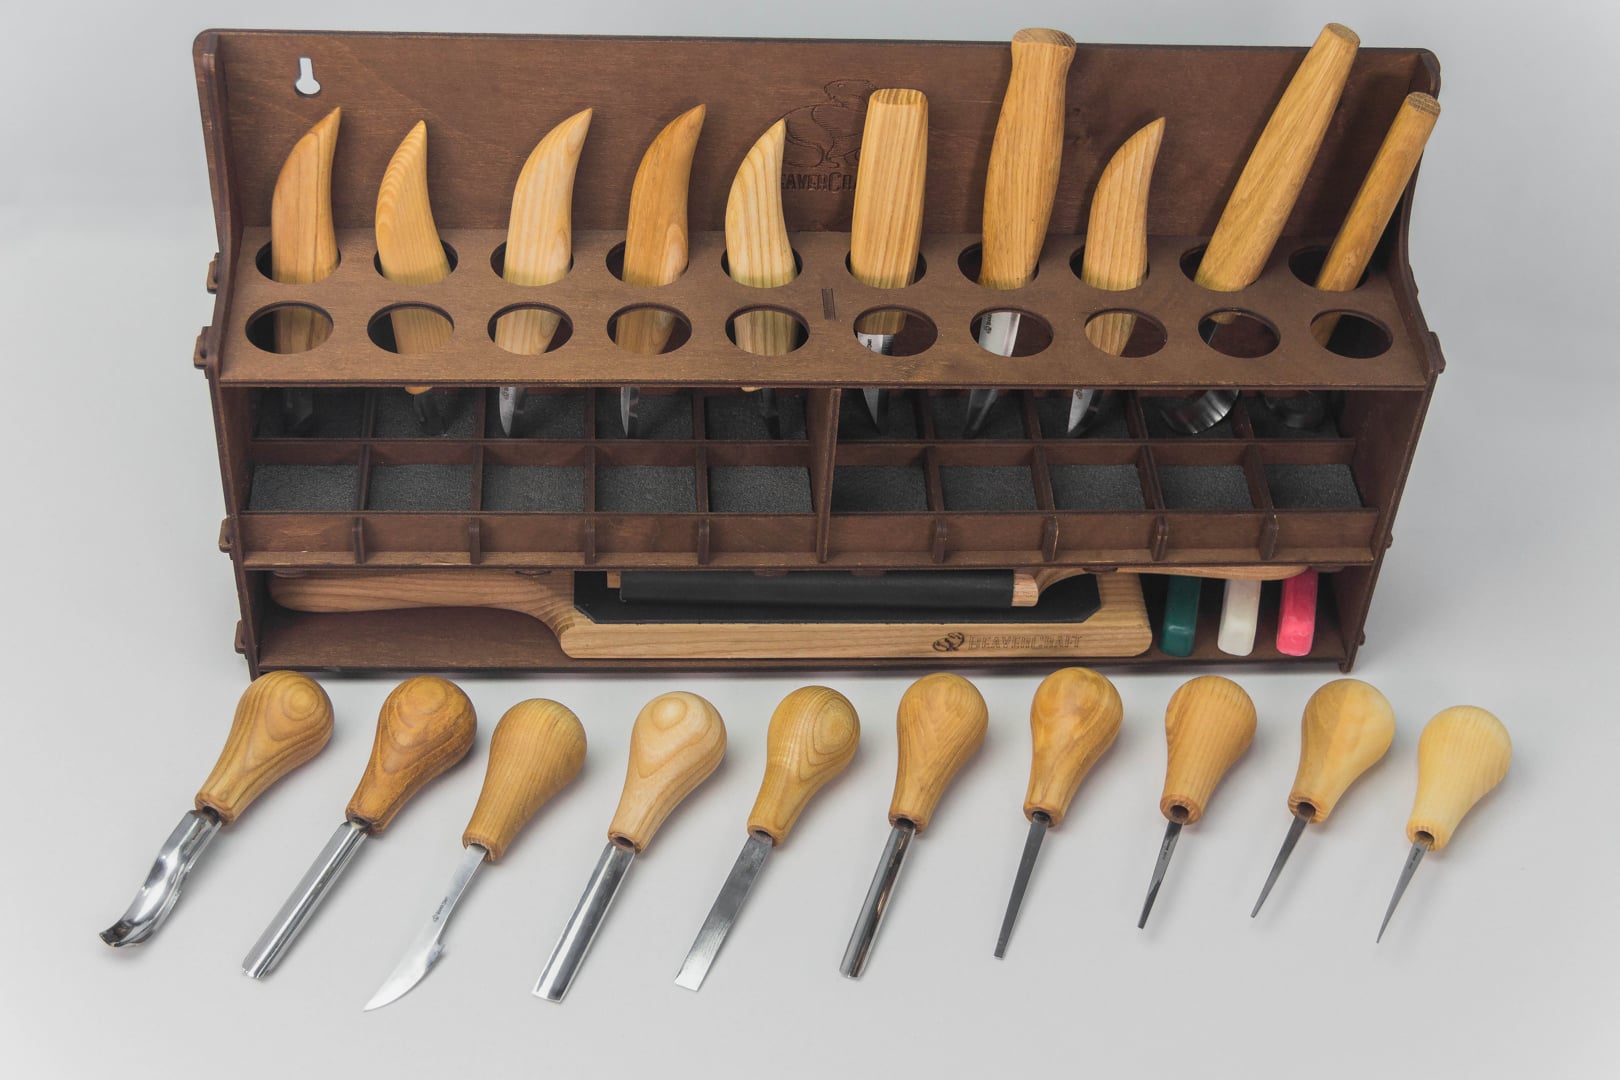 S57L - Large Wood Carving Tool Set with 20 Tools (left-handed)